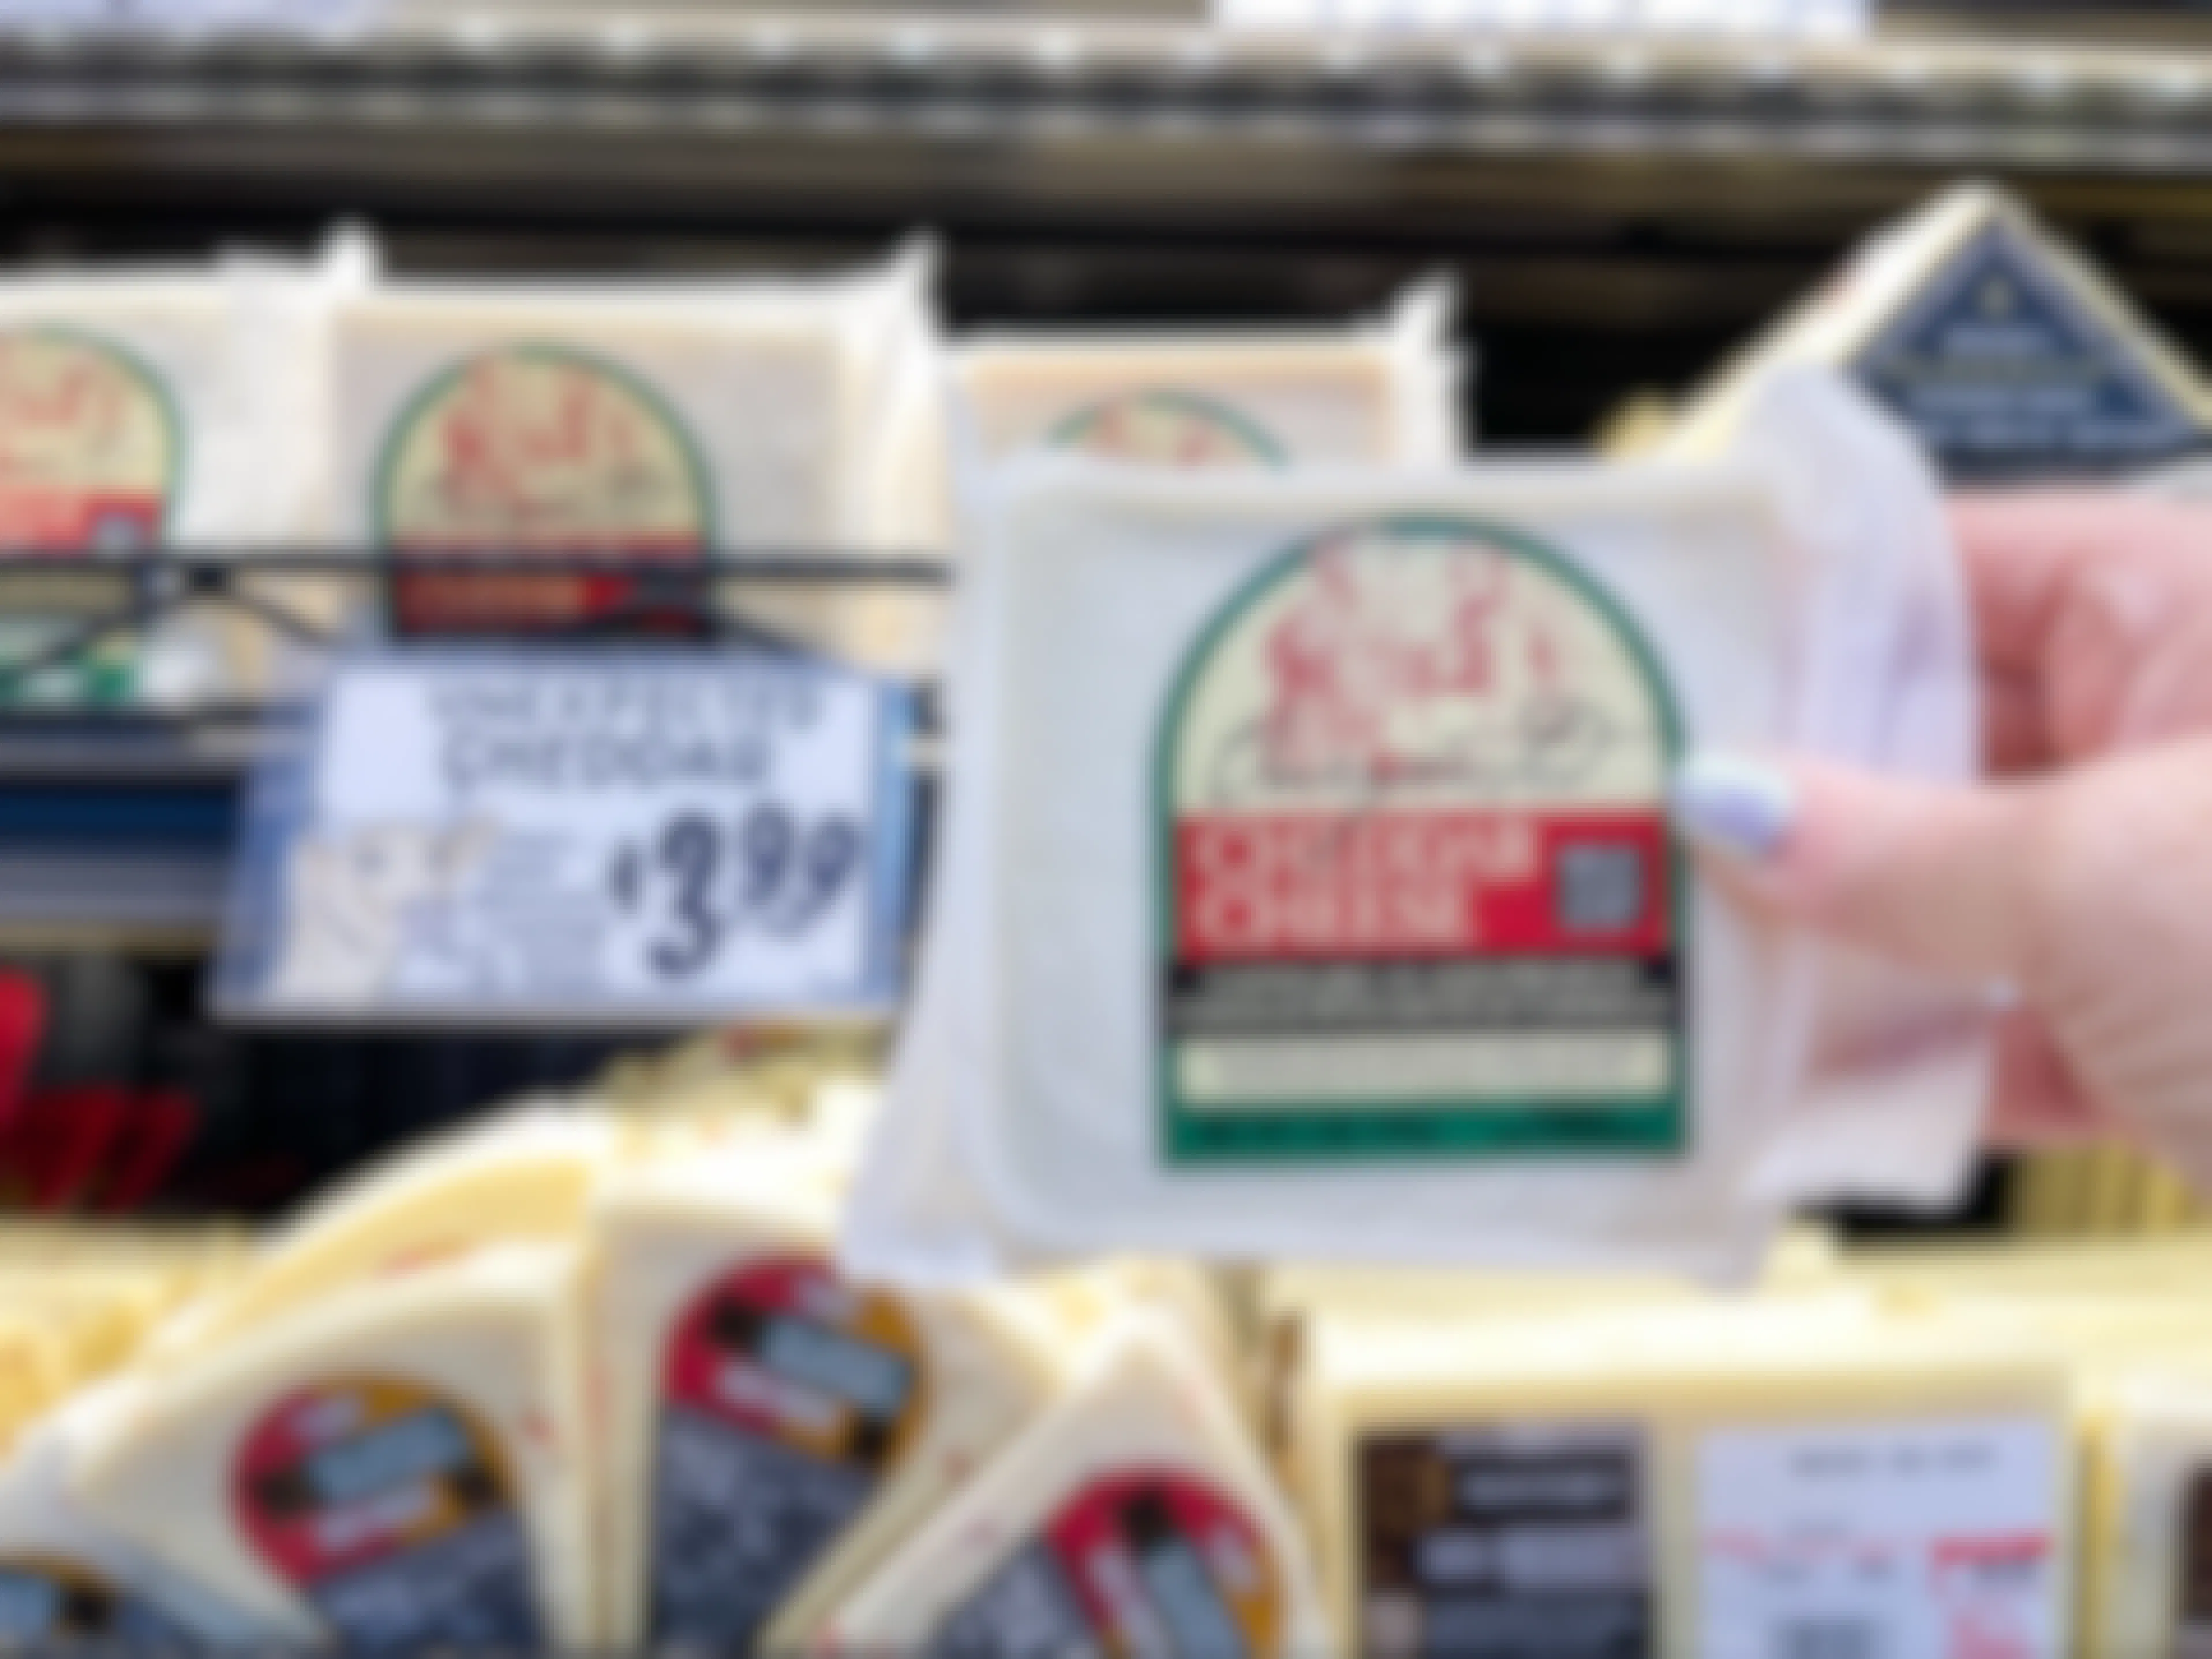 A person's hand holding a package of Trader Joe's Unexpected Cheddar Cheese in front of the price sign on the refrigerated shelf at Trader Joe's..